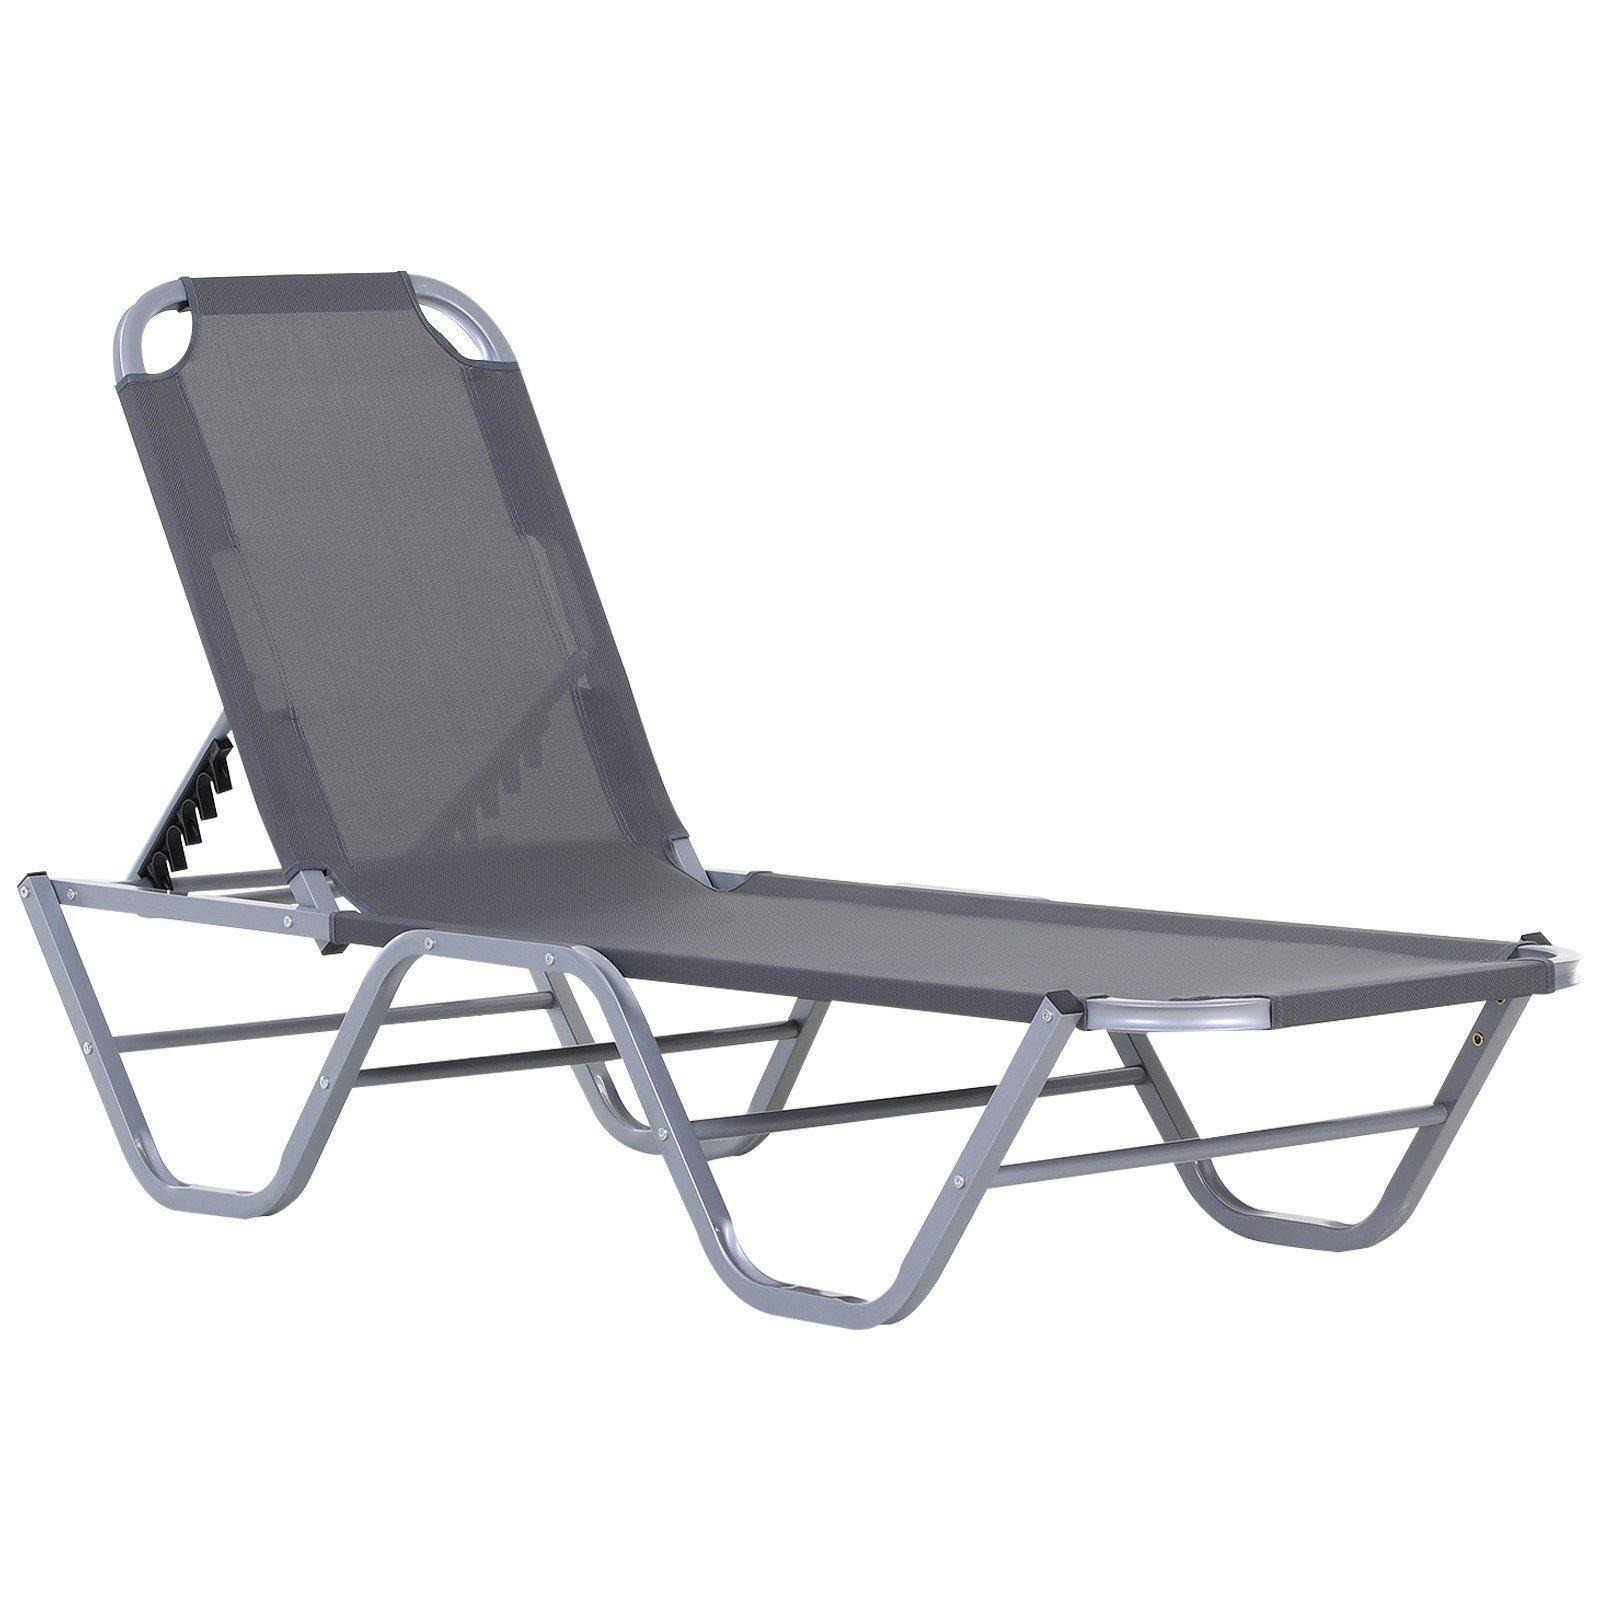 Sun Lounger Relaxer Recliner with 5-Position Adjustable Backrest - image 1